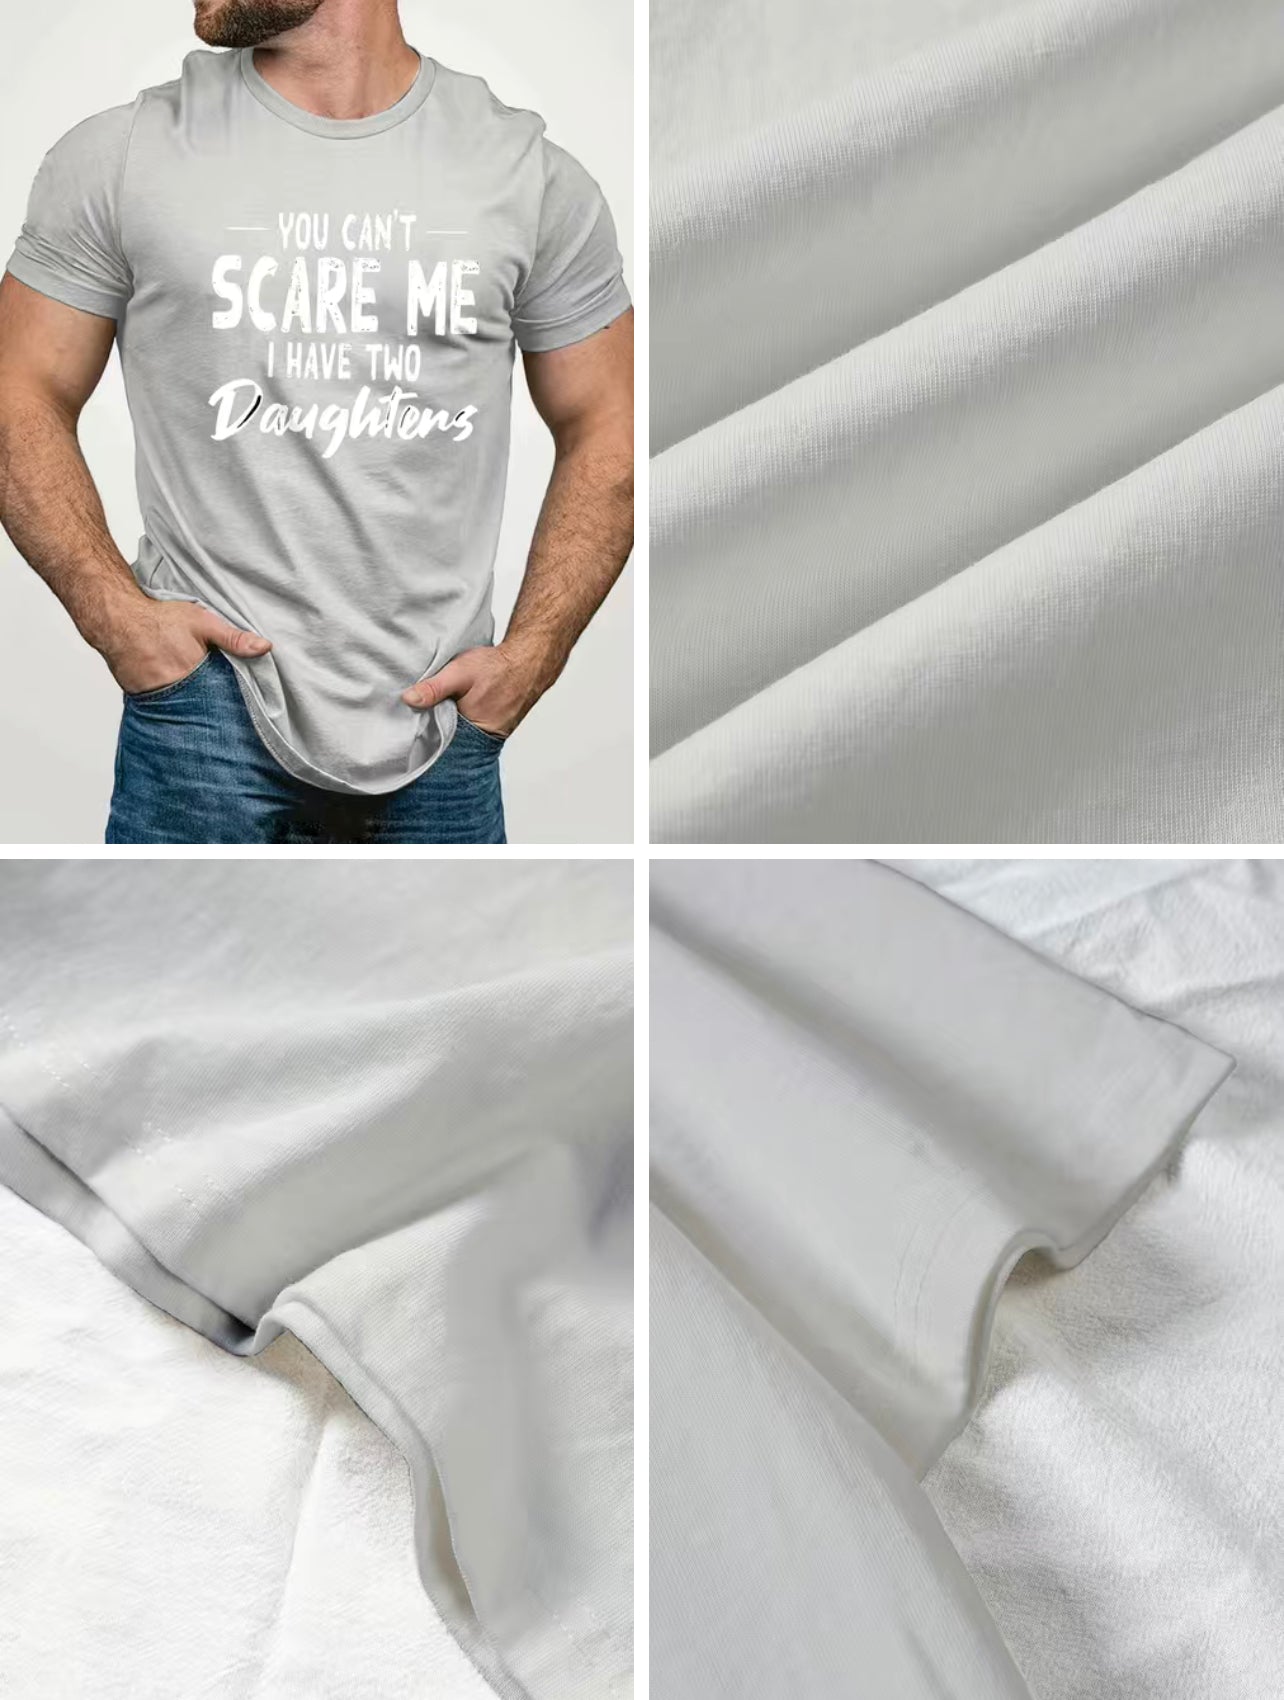 You Can’t Scare Me, I Have Two Daughter’s T-Shirt